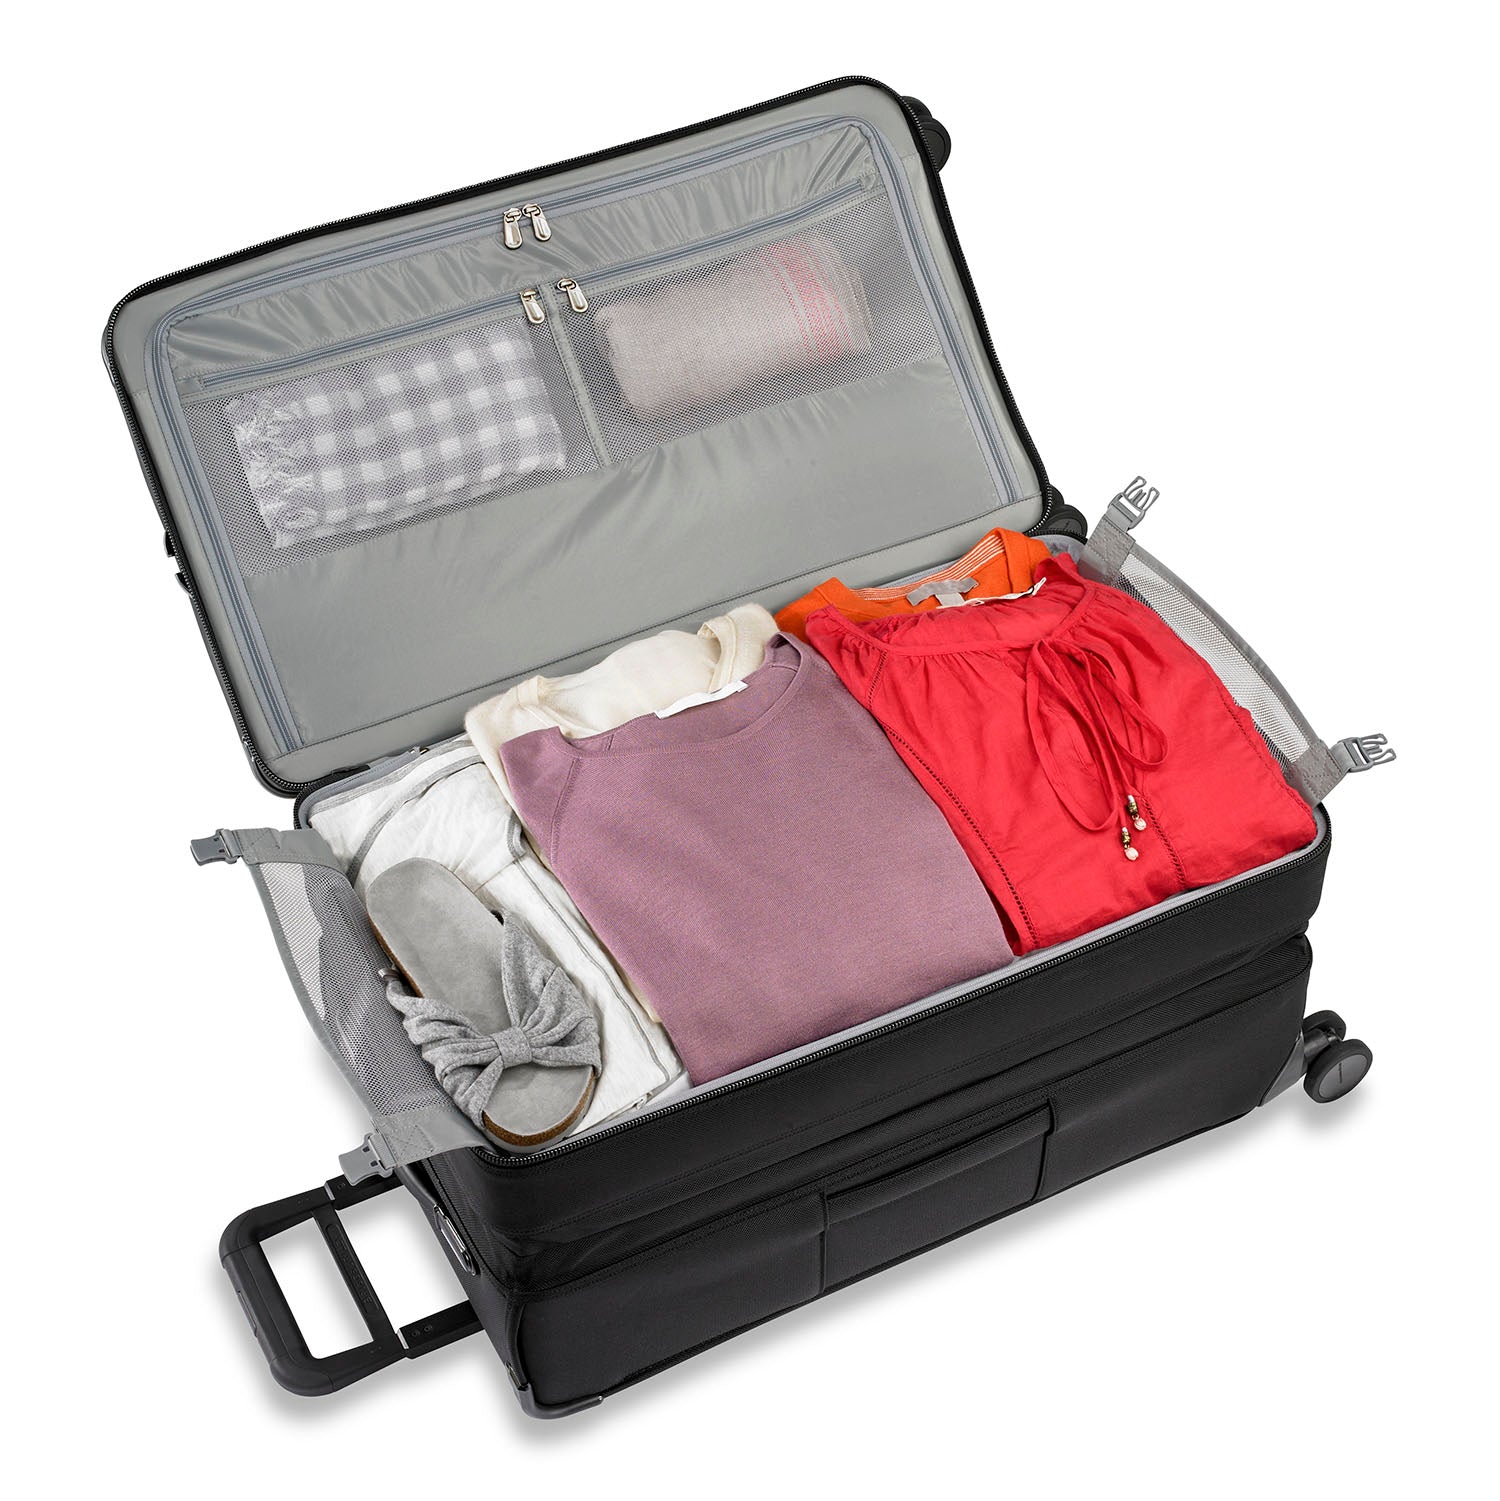 Large Rolling Trunk Spinner Luggage | Briggs & Riley